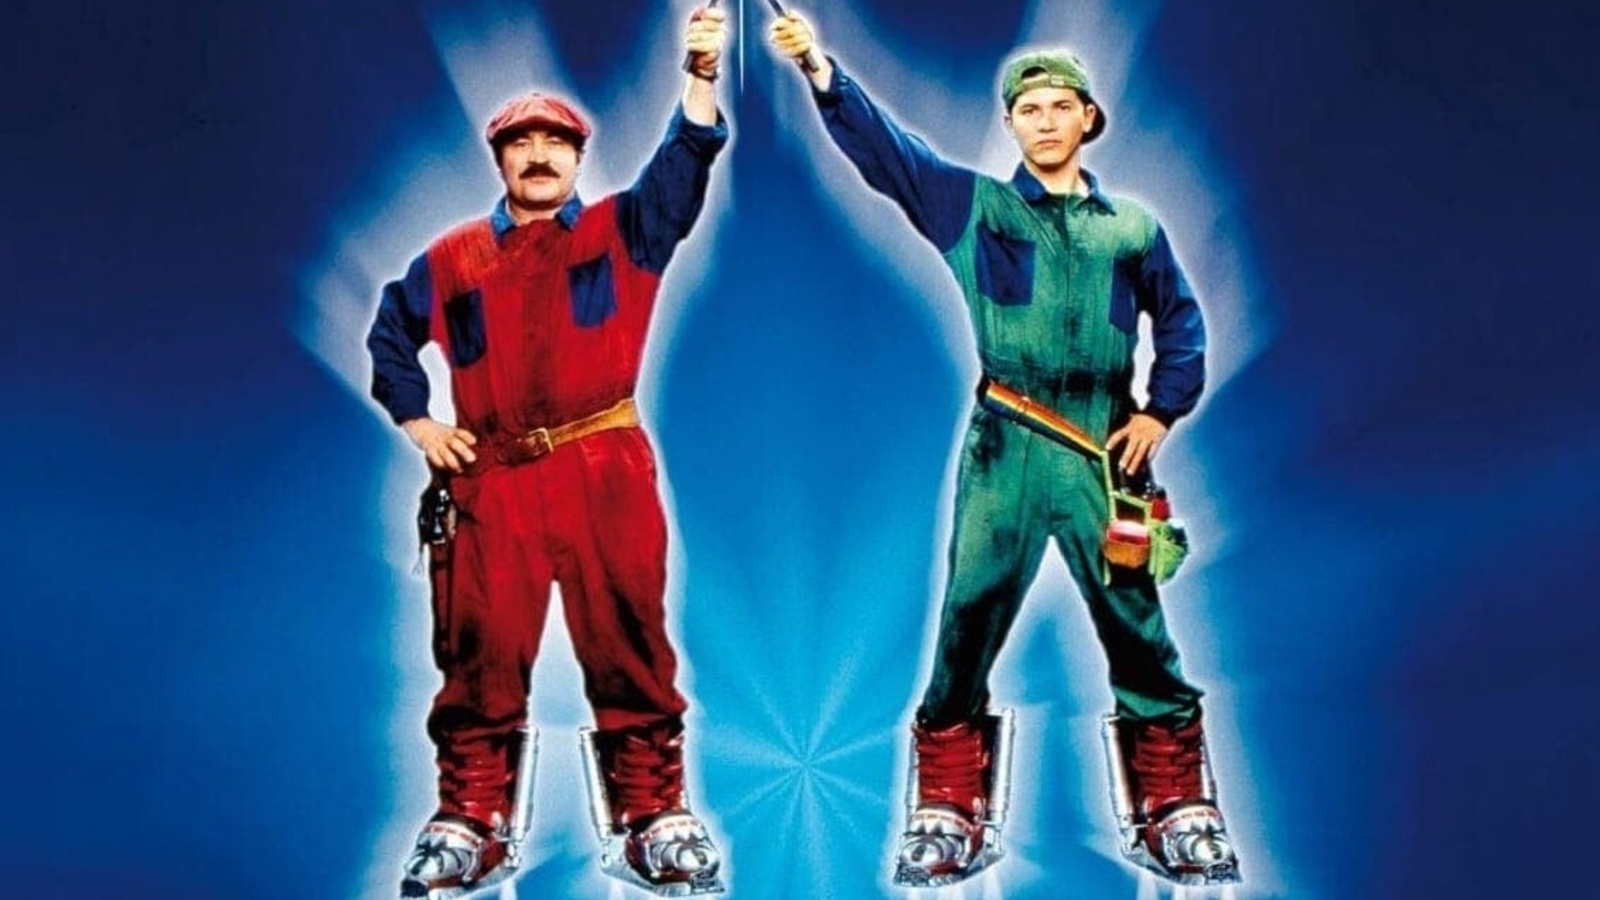 Super Mario Bros, Seth Rogen on the 1993 movie: "One of the worst ever made"